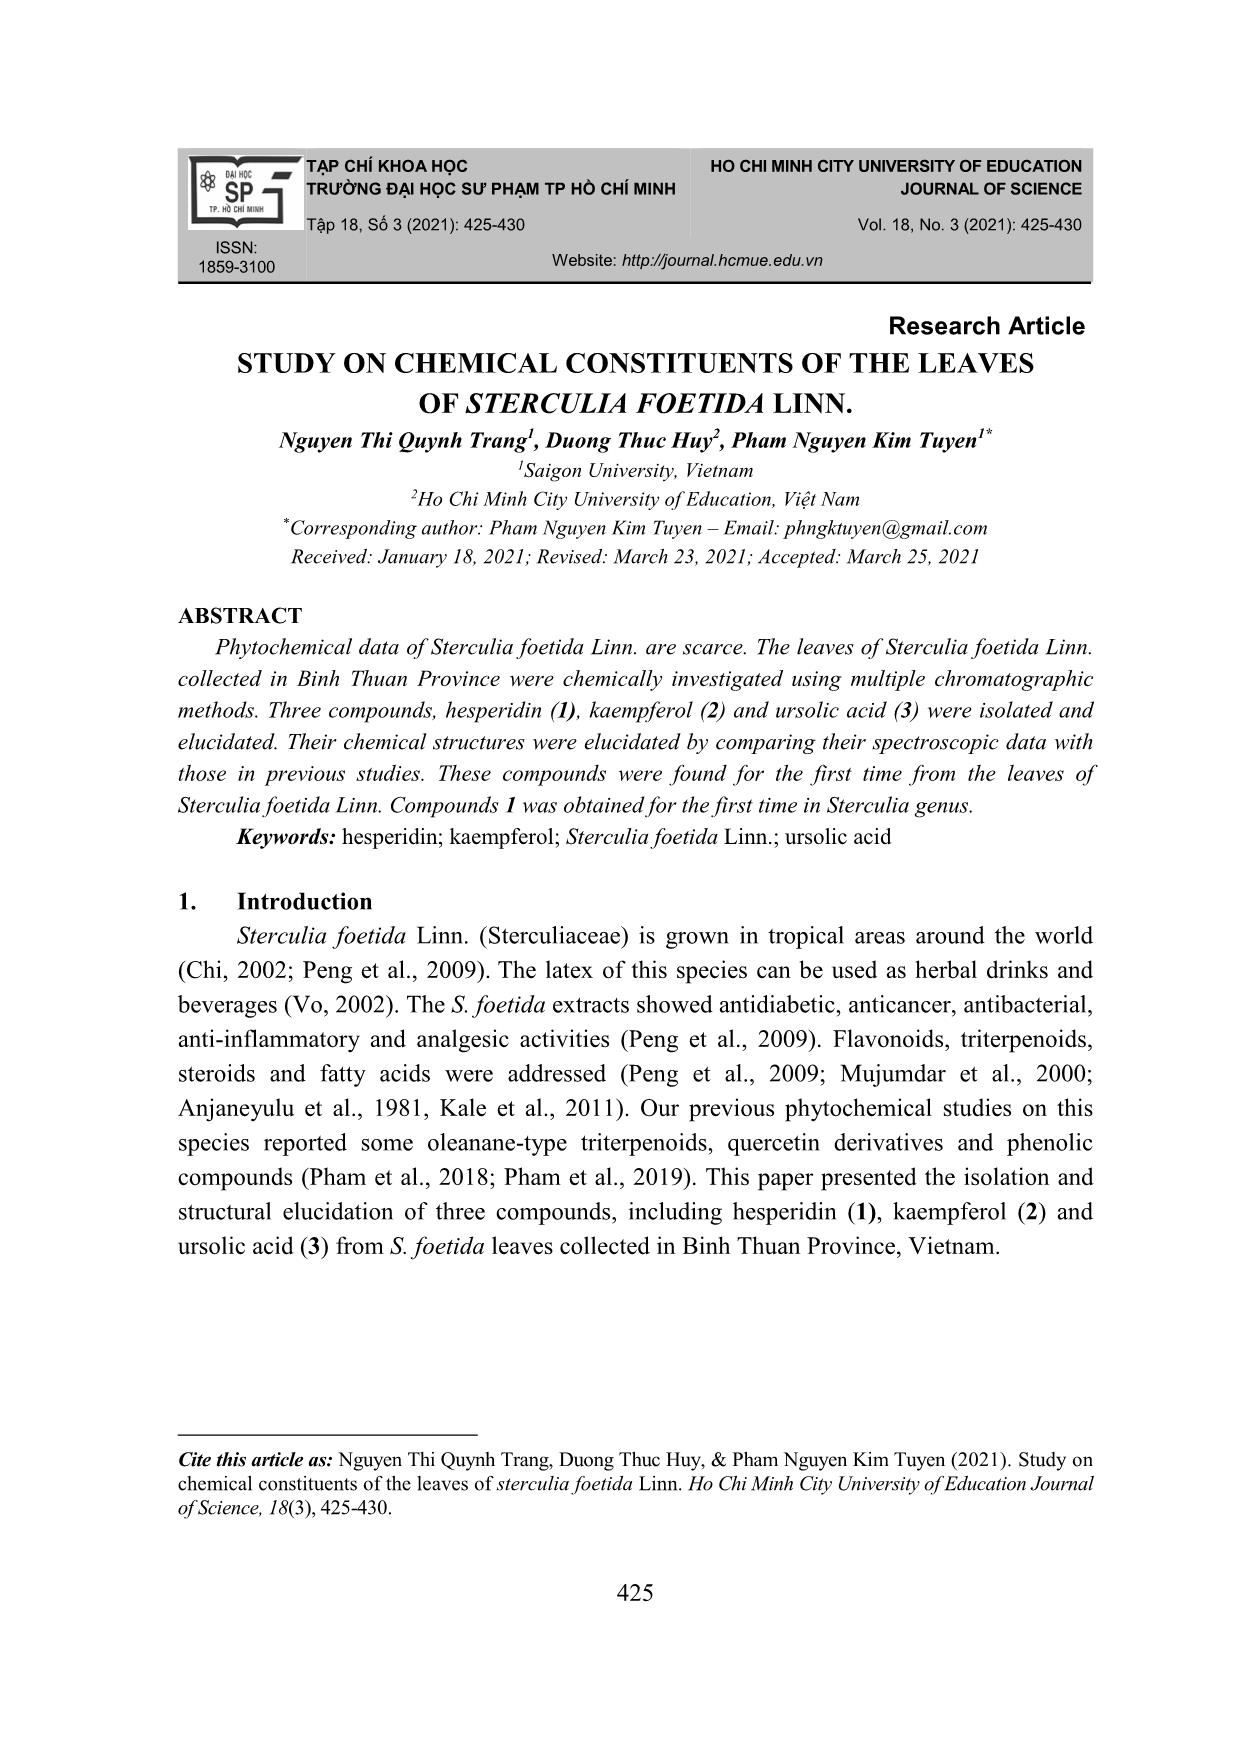 Study on chemical constituents of the leaves of sterculia foetida linn trang 1